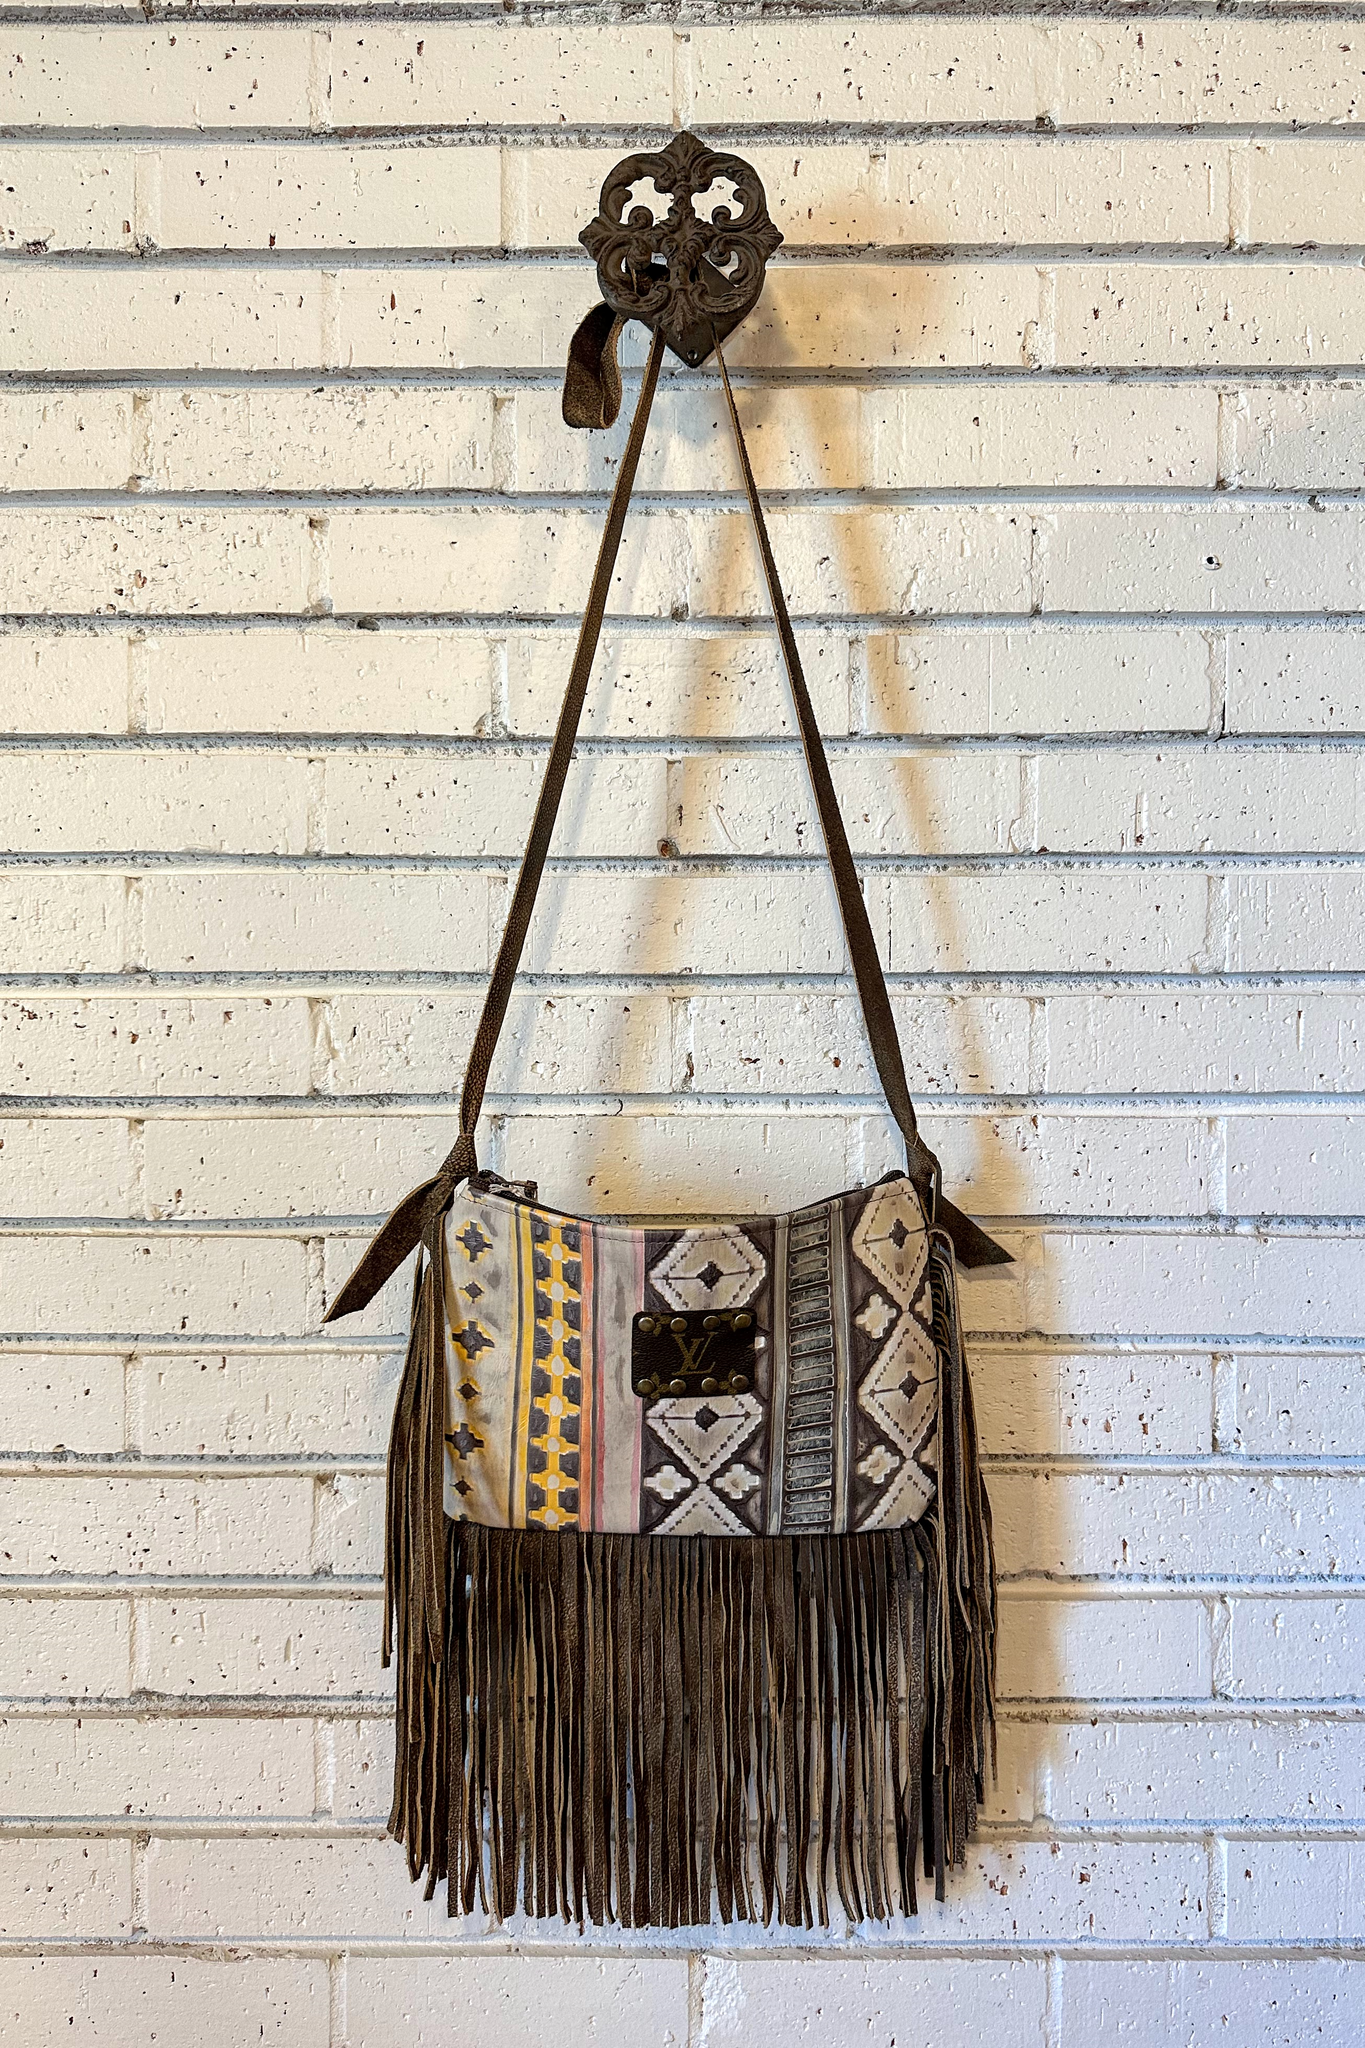 The Southern Gypsy Bags